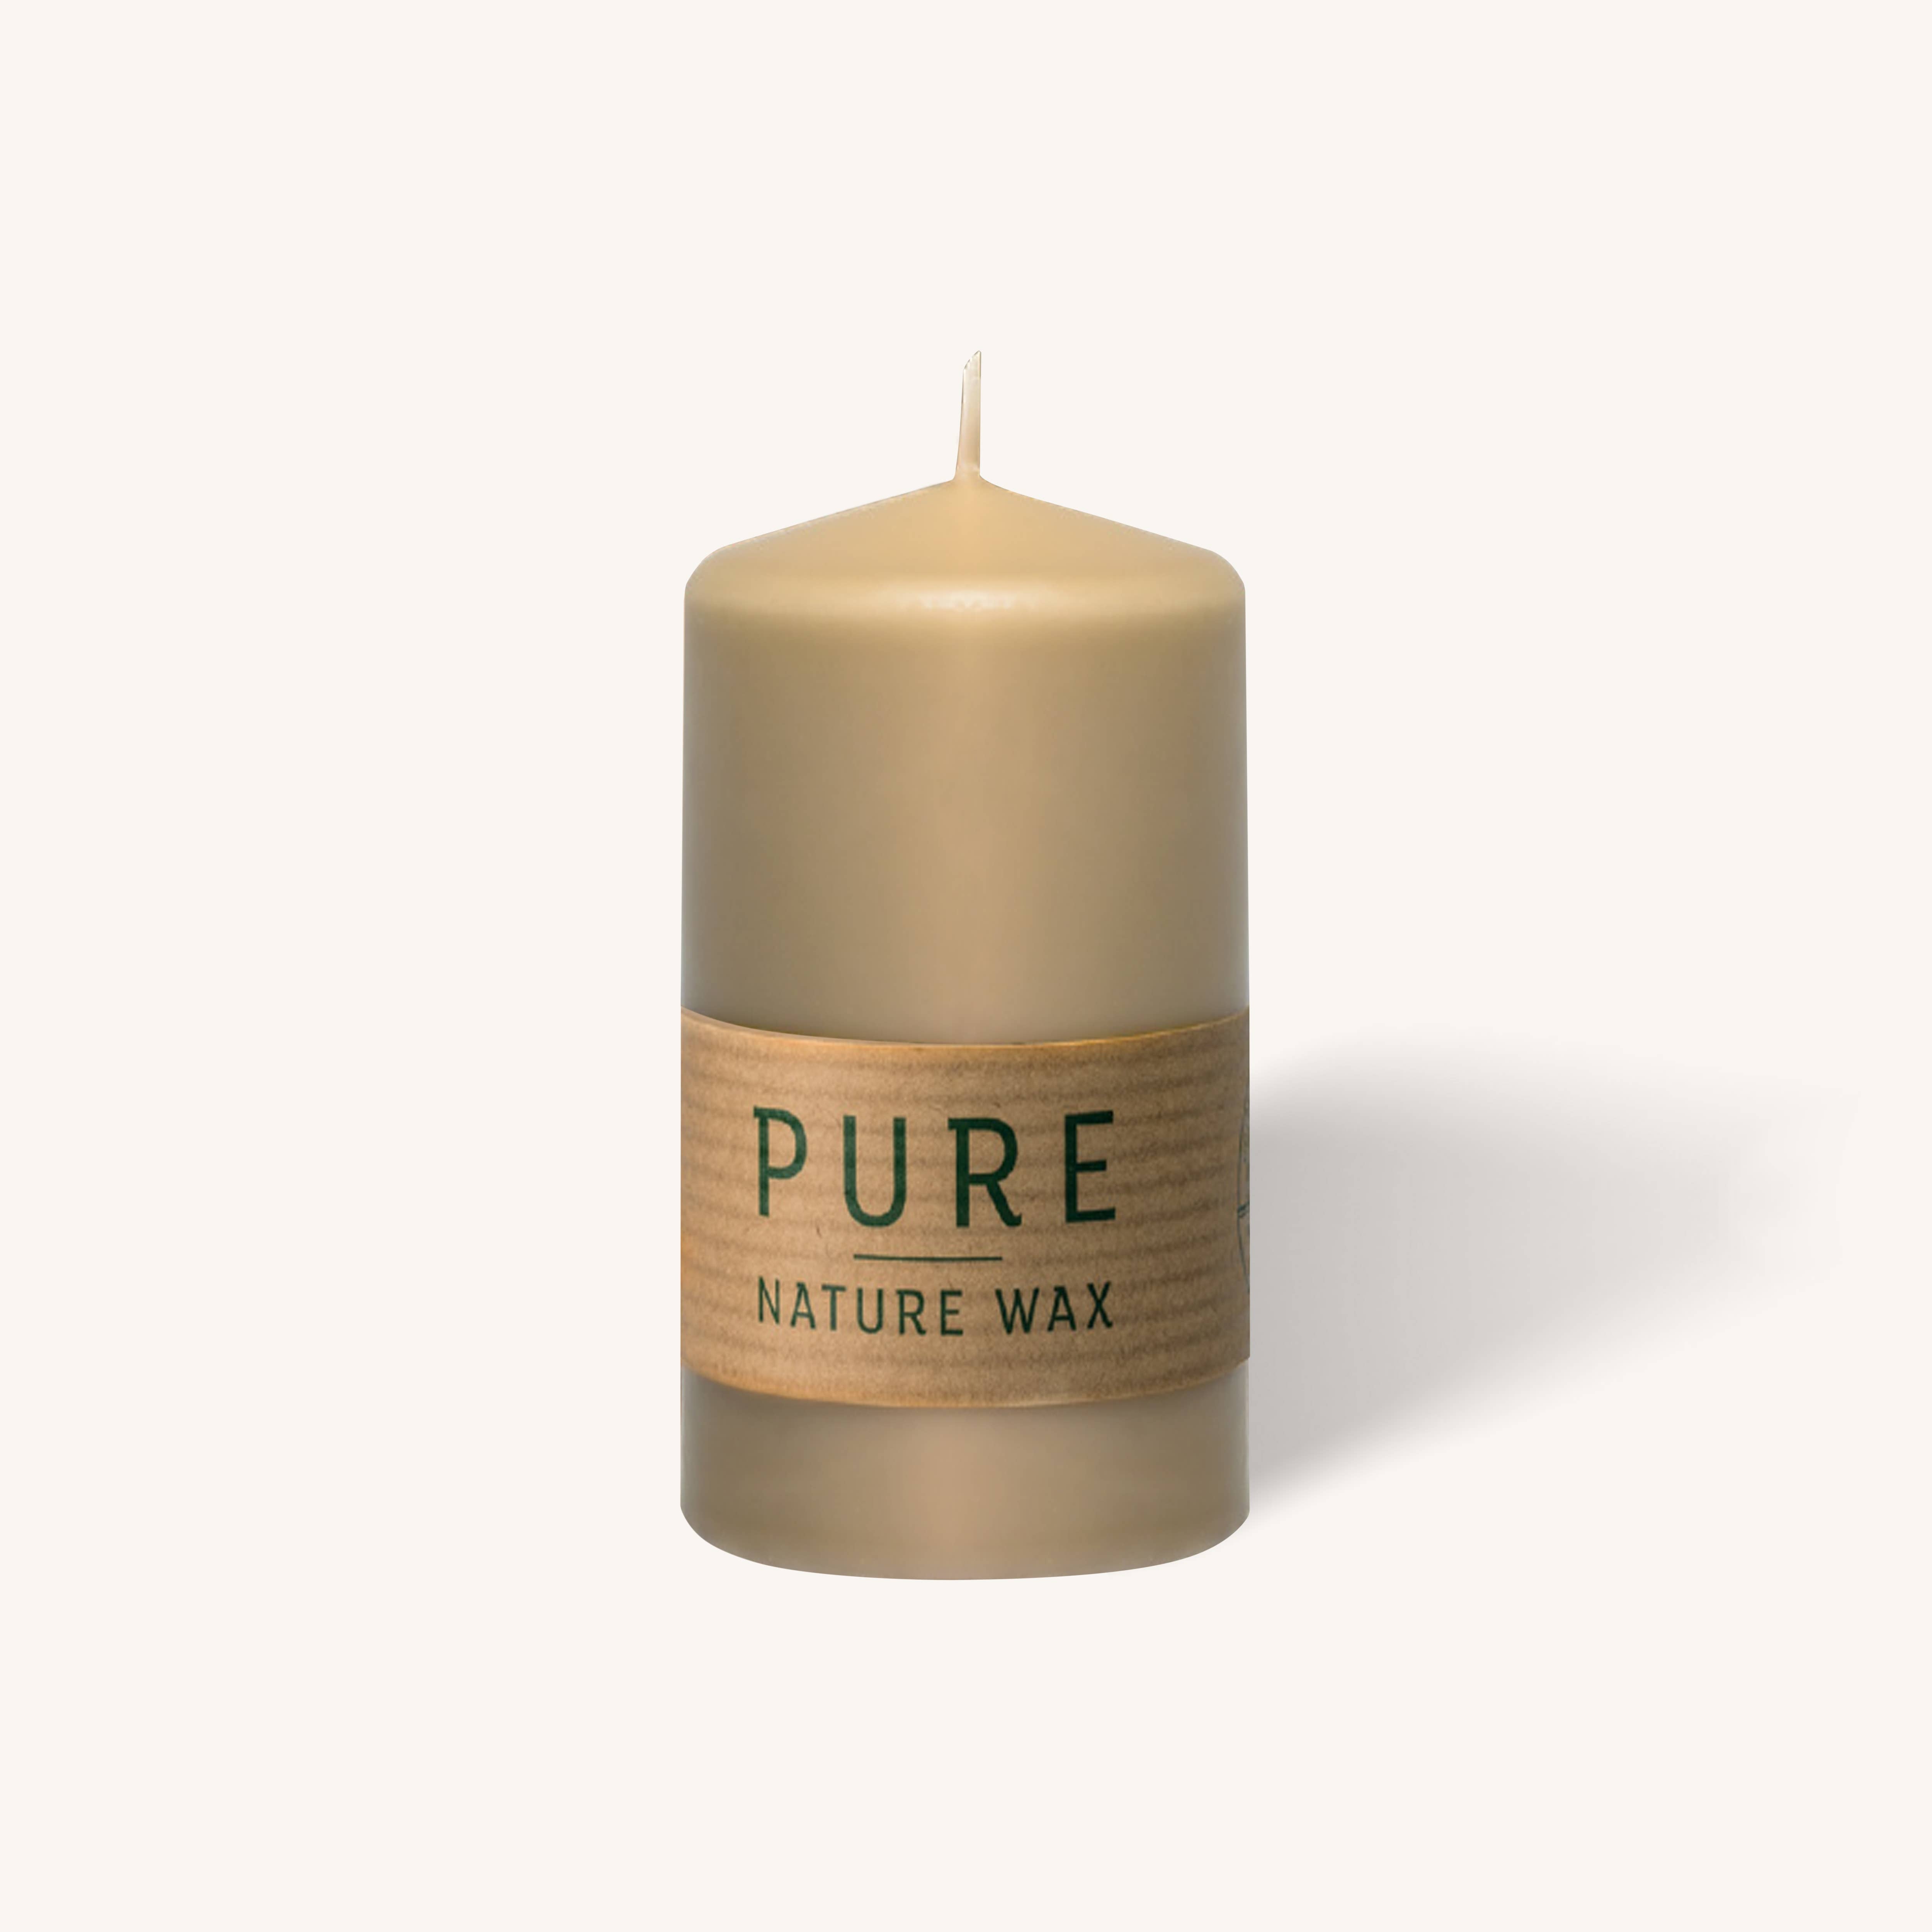 Pure Nature Wax Sand Pillar Candle - 2.7” x 5" - 3 Pack